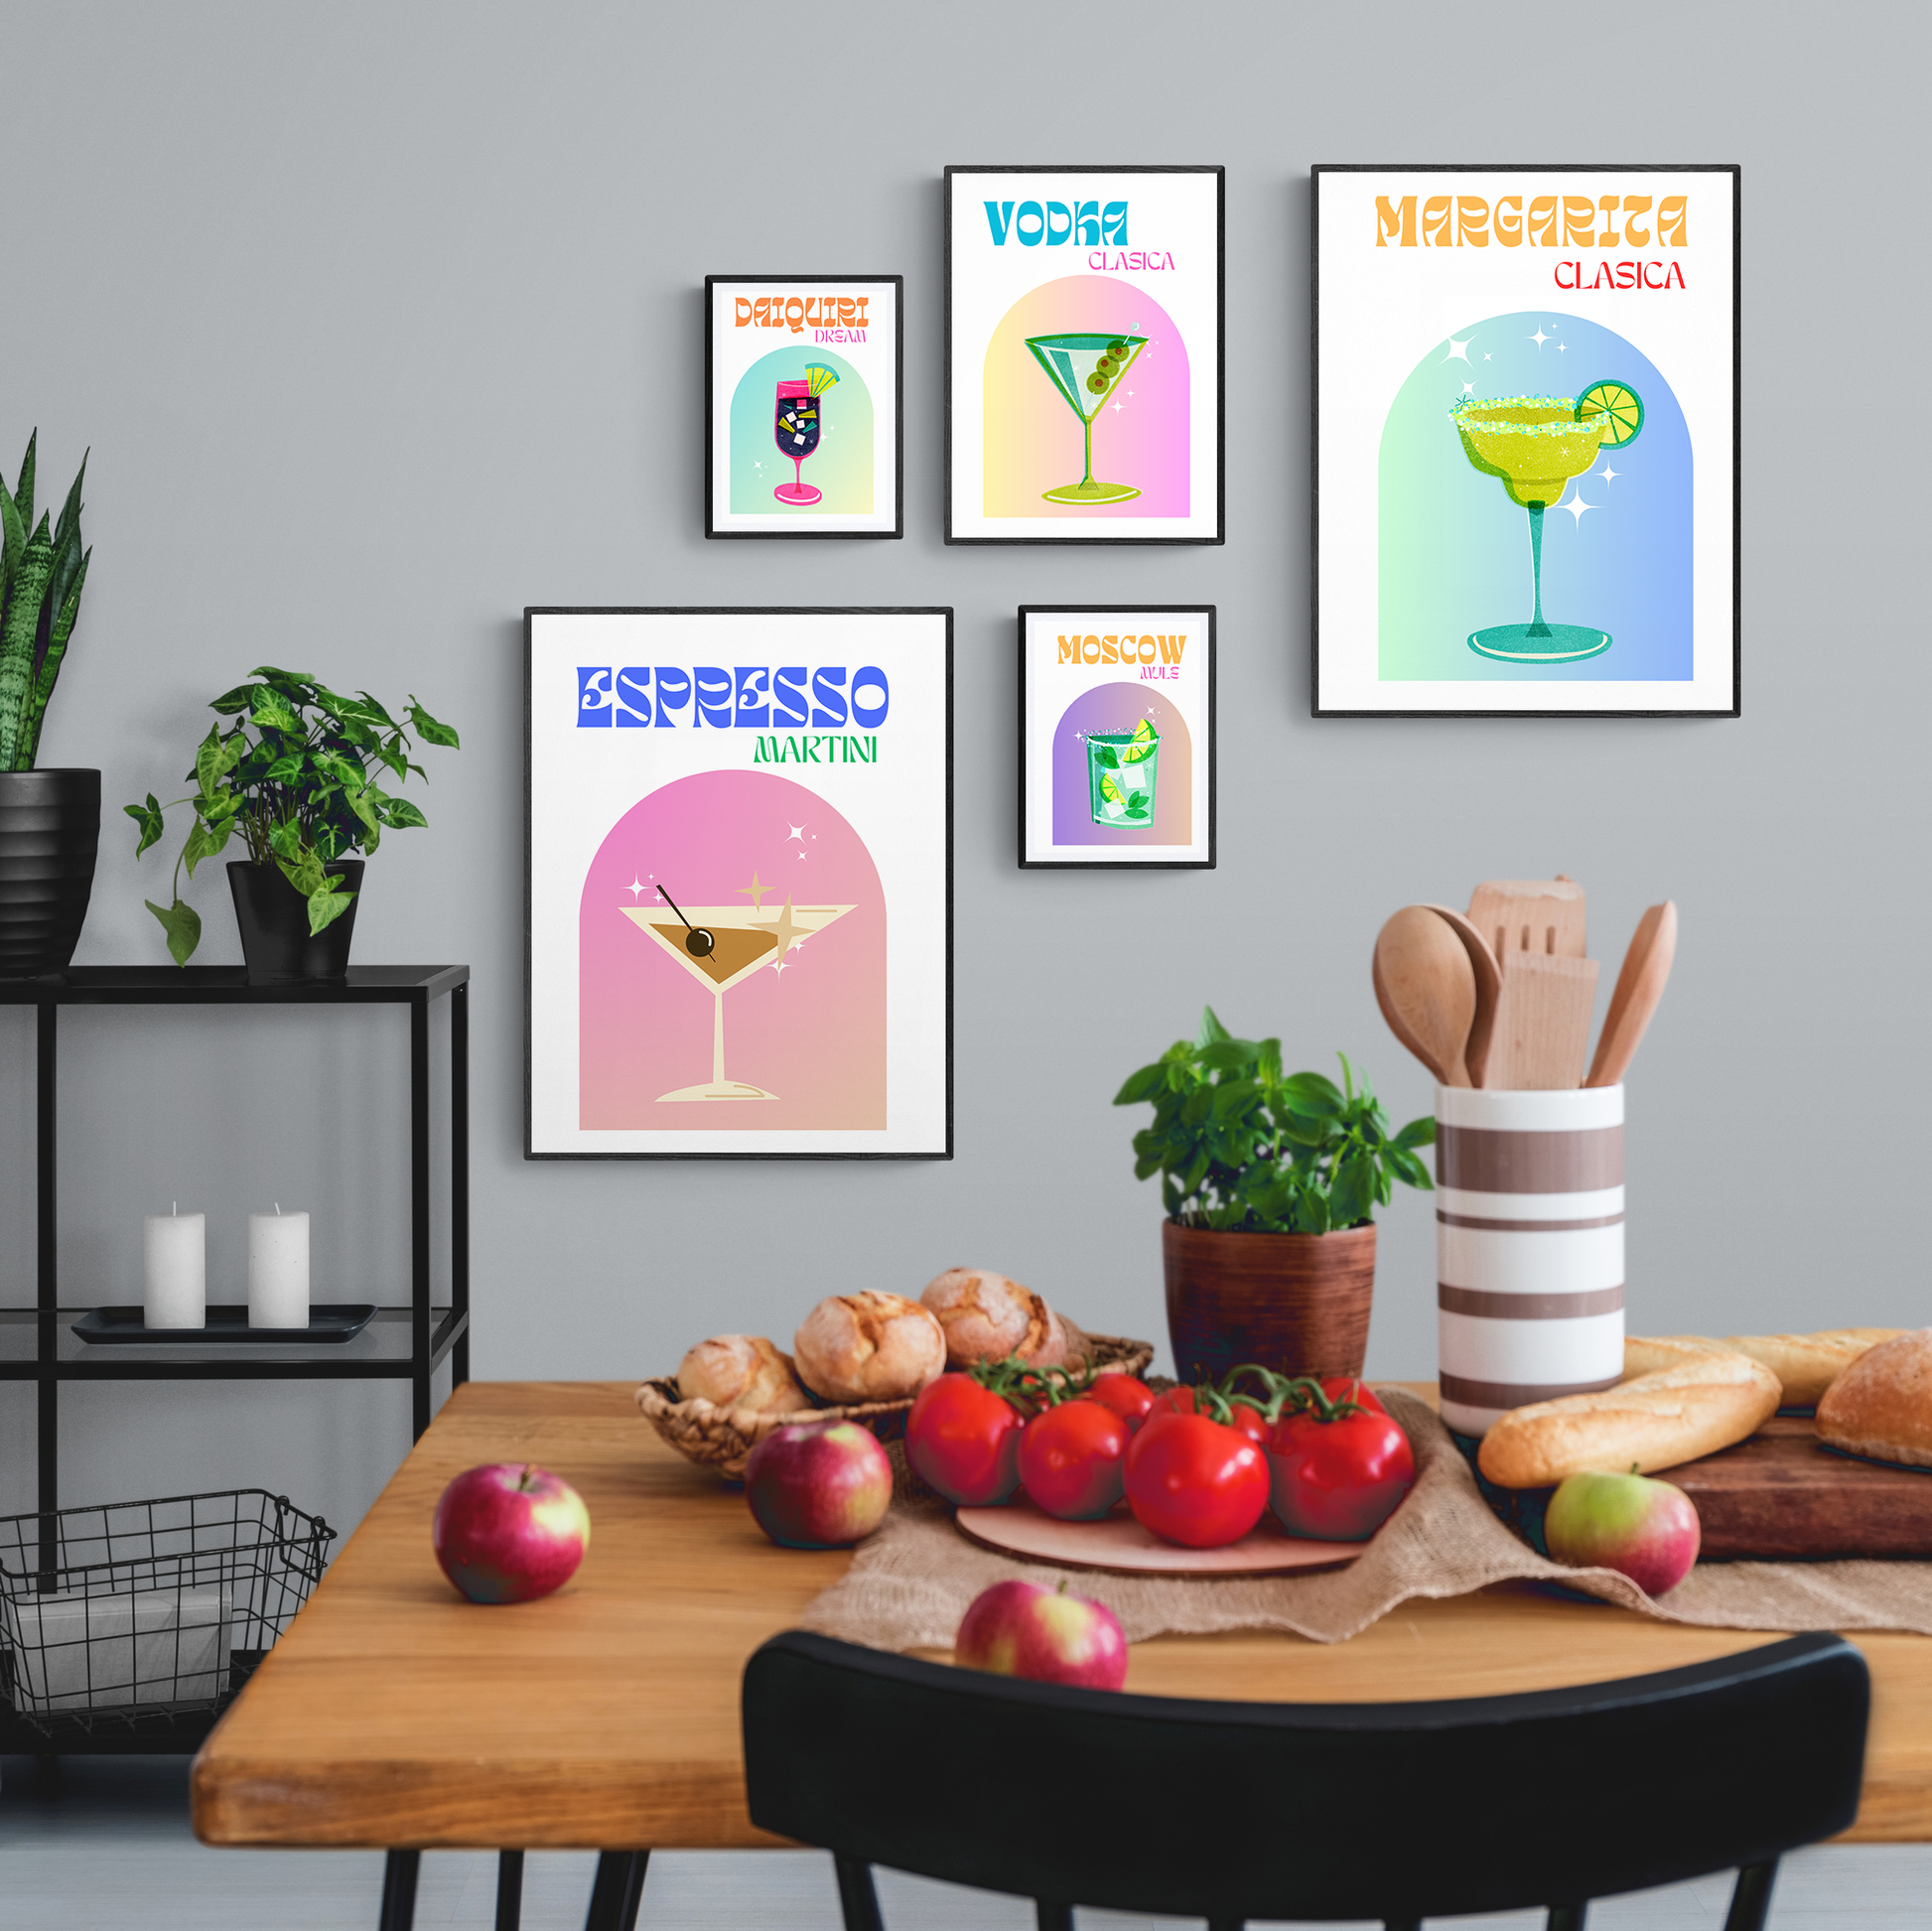 Bring the chic bar décor to your own home with this Negroni Cocktail Print. This cocktail wall art print features a stylish, minimalistic design to add a touch of elegance to any space. With its vibrant and saturated colors, it's a perfect choice for cocktail lovers and bar decor enthusiasts.